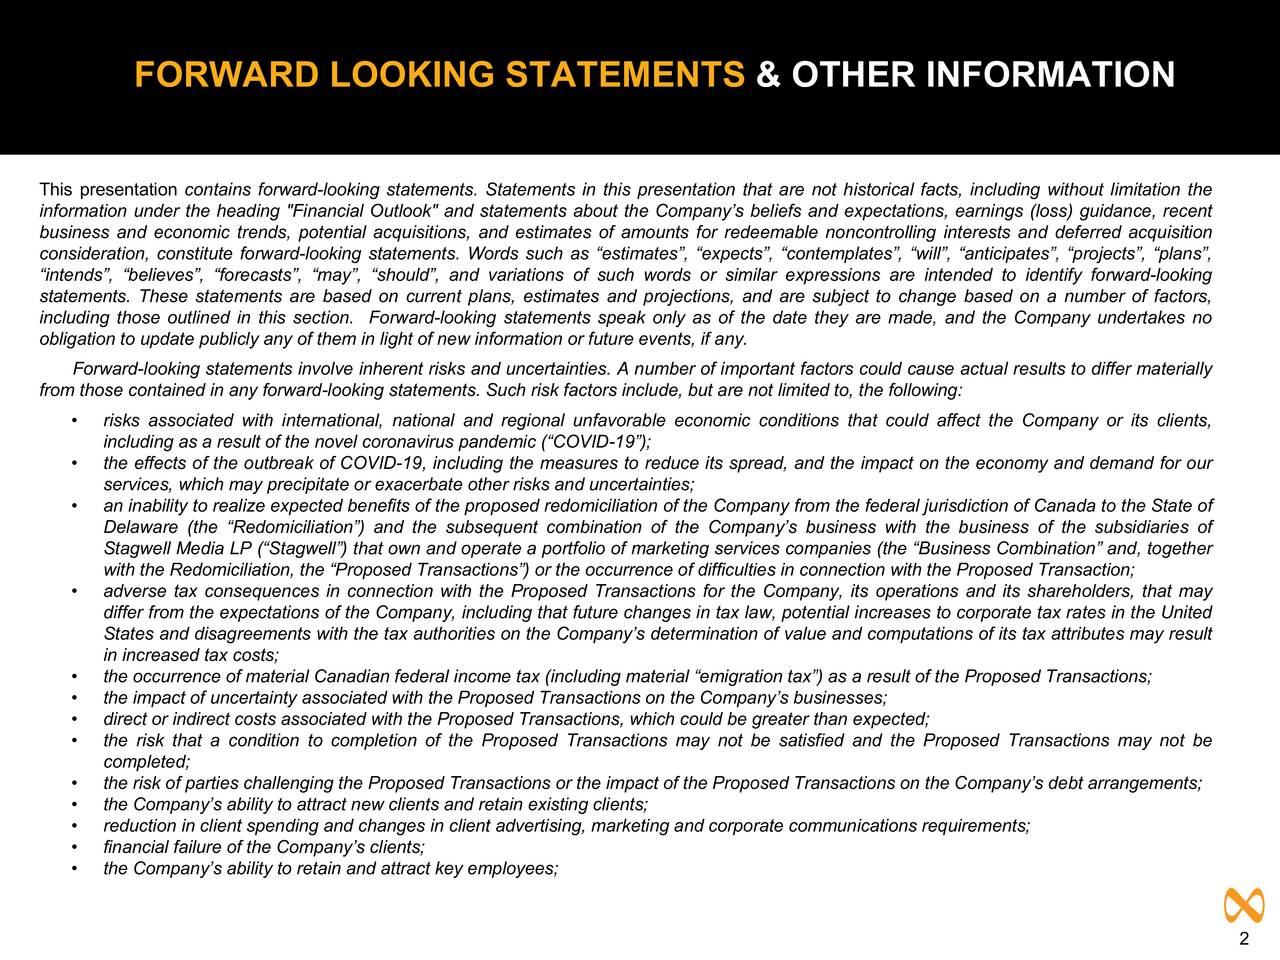 FORWARD LOOKING STATEMENTS & OTHER INFORMATION